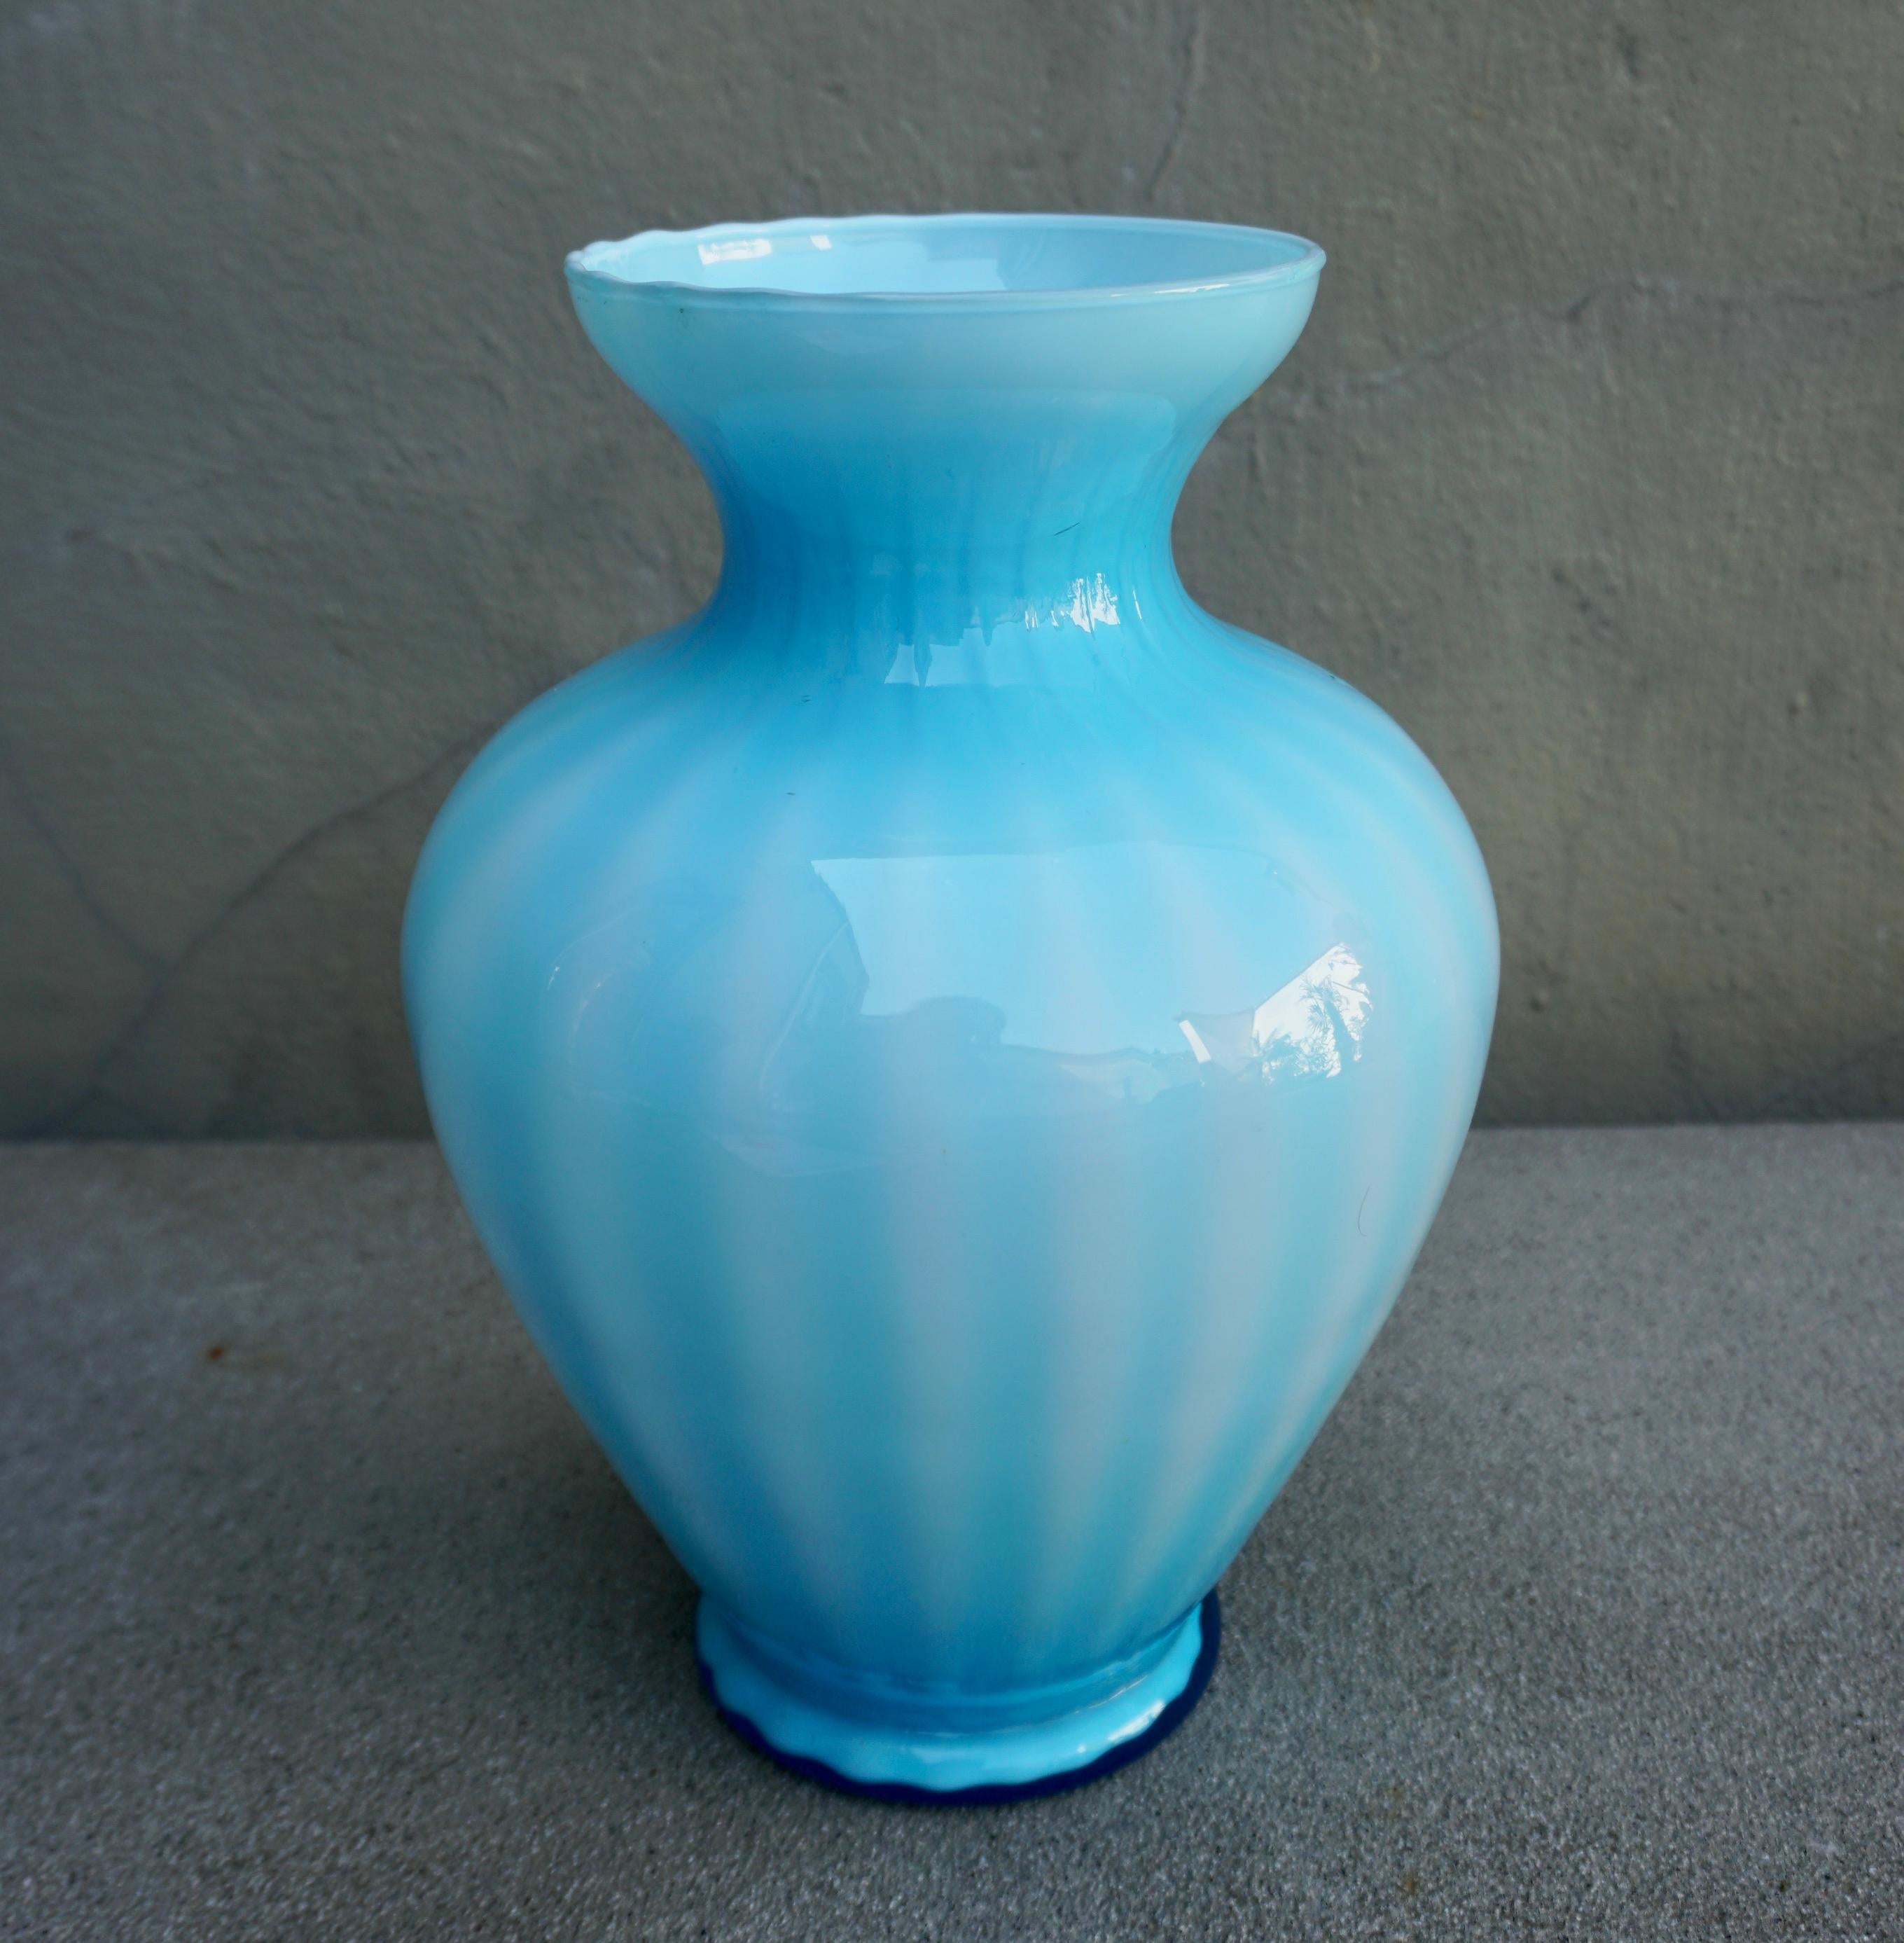 Extra large vintage Murano glass vase in a perfect light blue tone. Mouth-blown in blue glass . 
Handmade in Italy, 1970s. 

H: 12.2